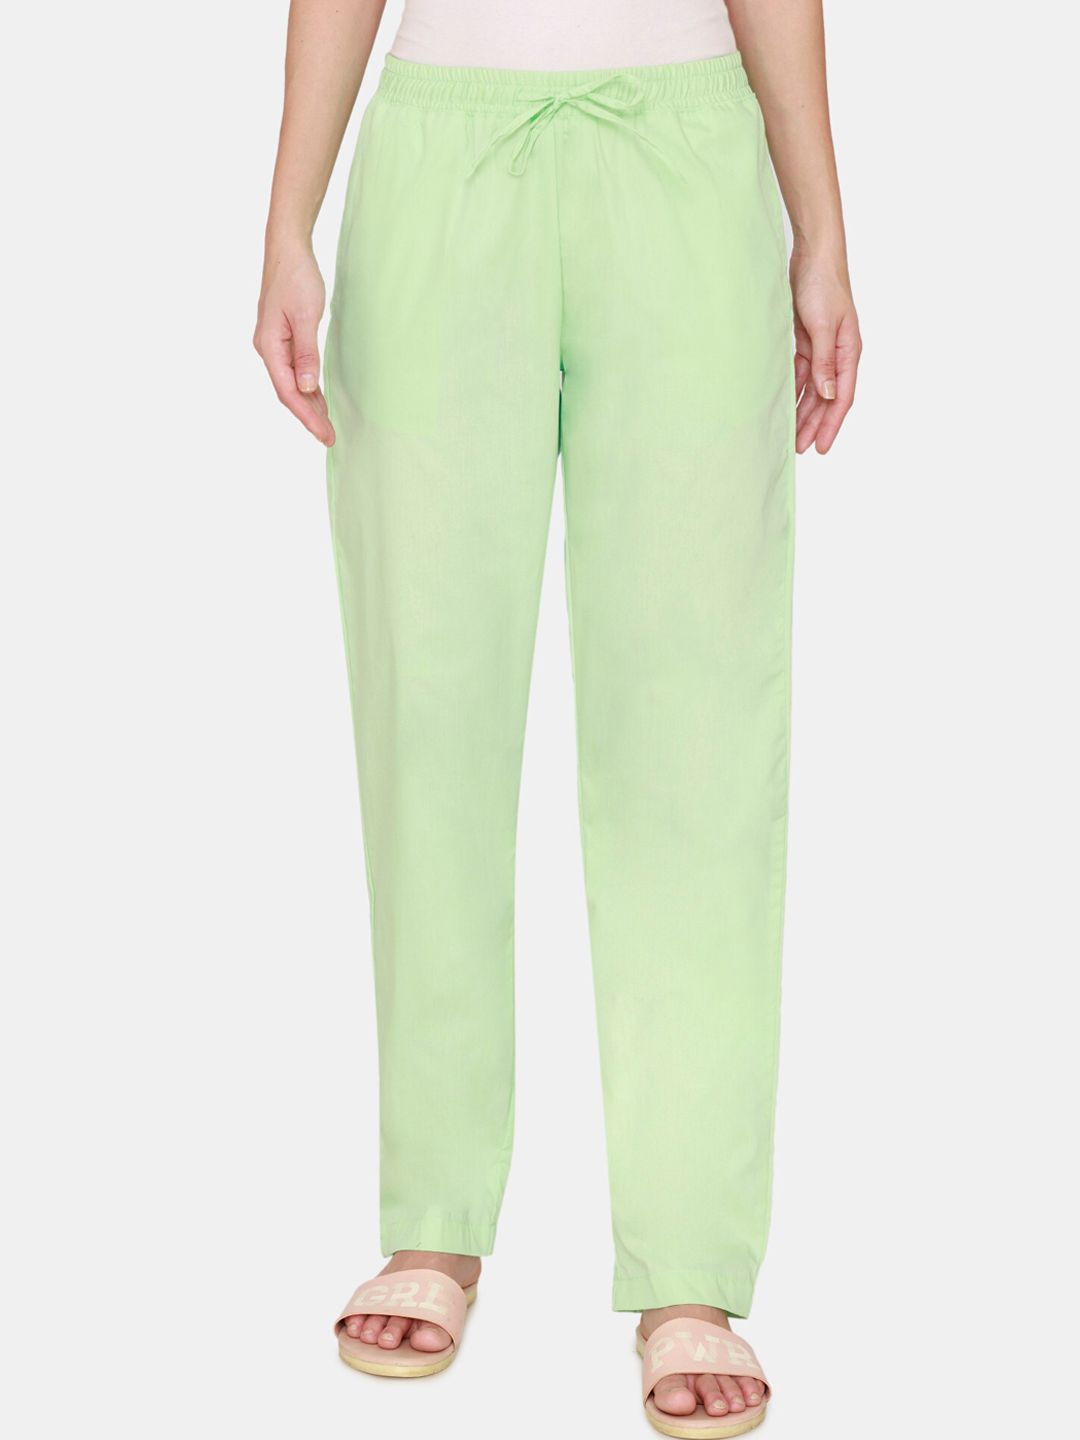 Coucou by Zivame Women Lime Green Solid Cotton Pyjamas Price in India